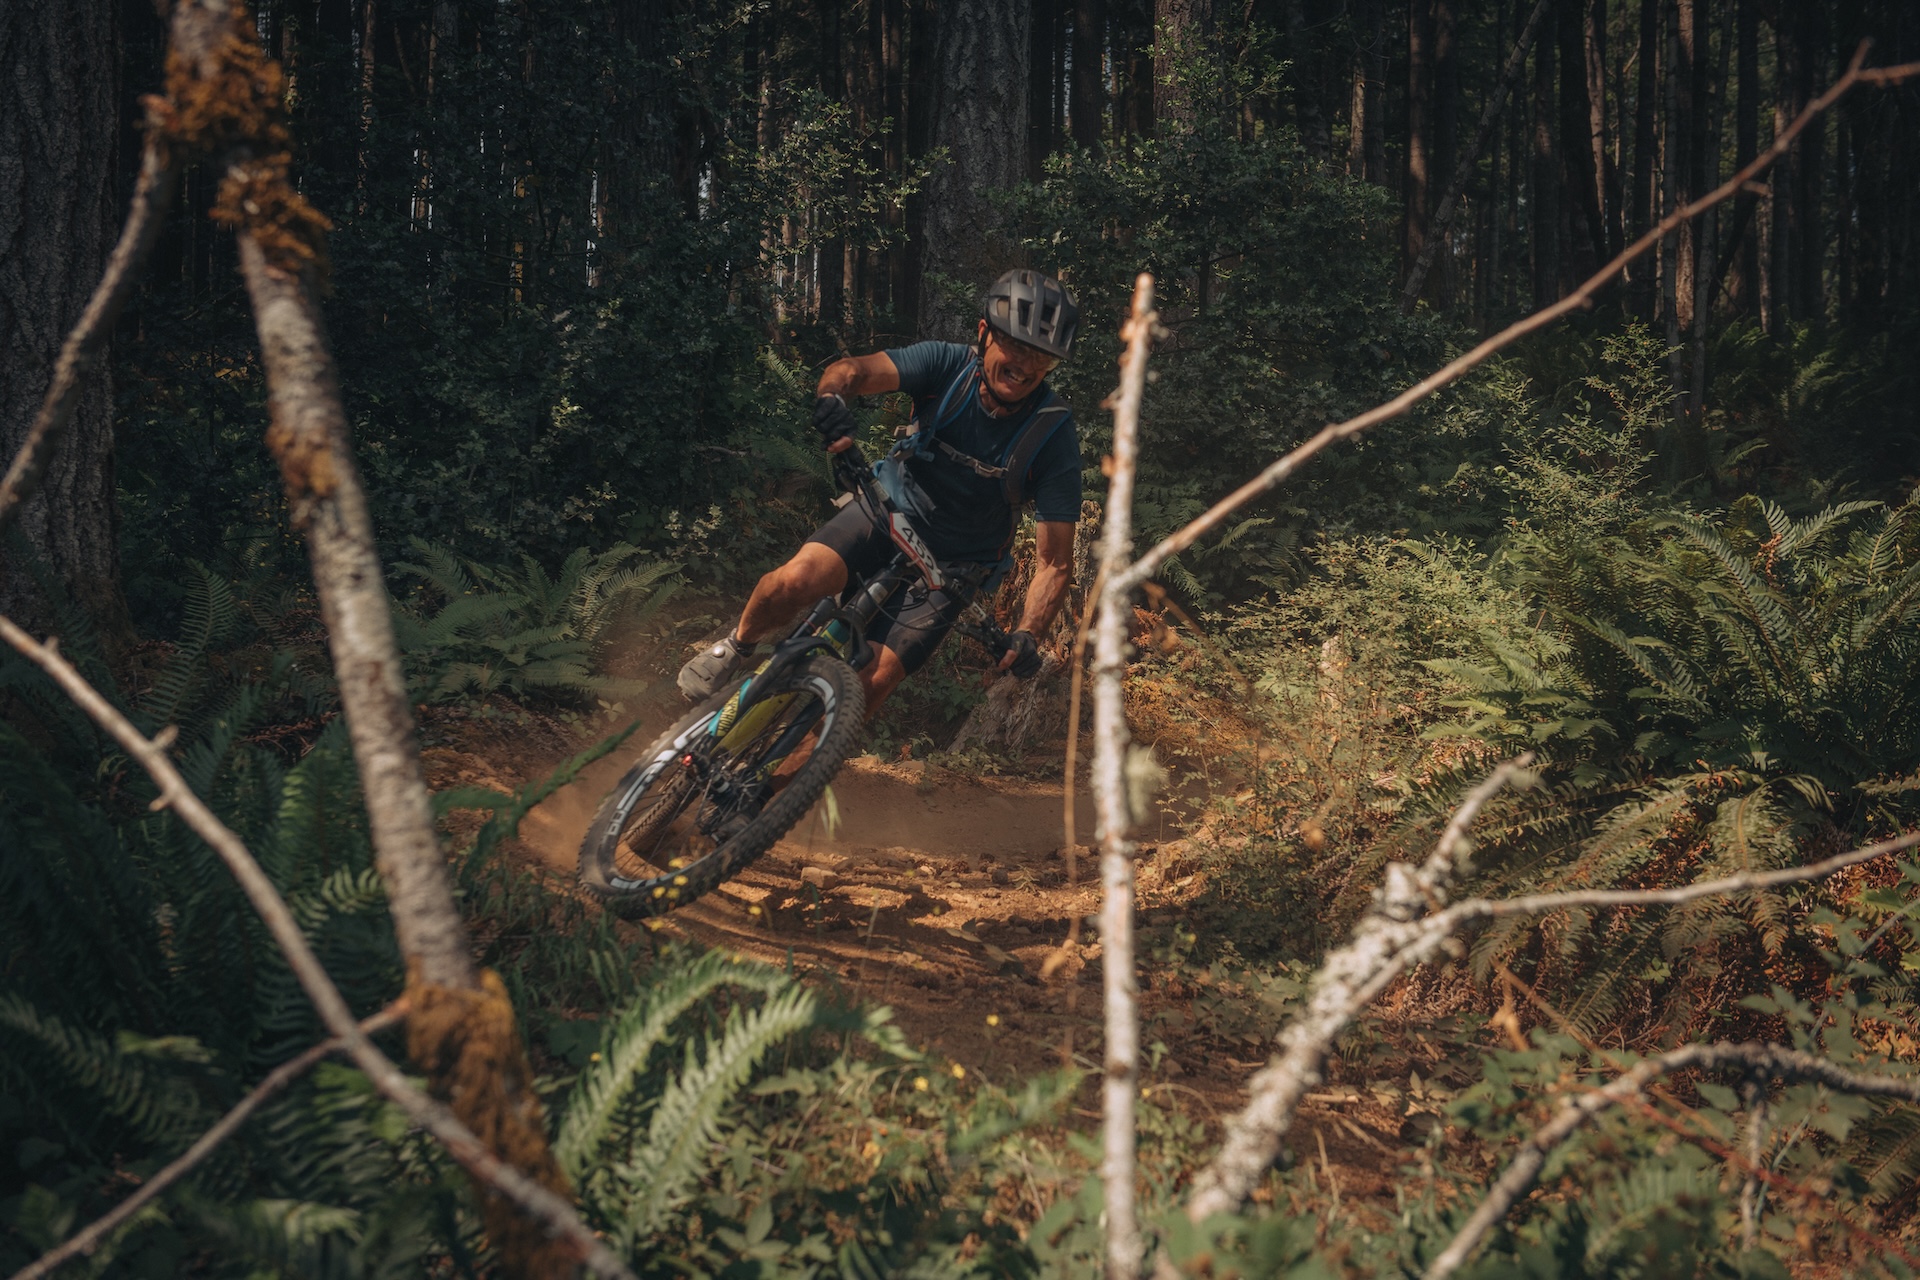 Tales from the Trails: Jeannot Desaulniers